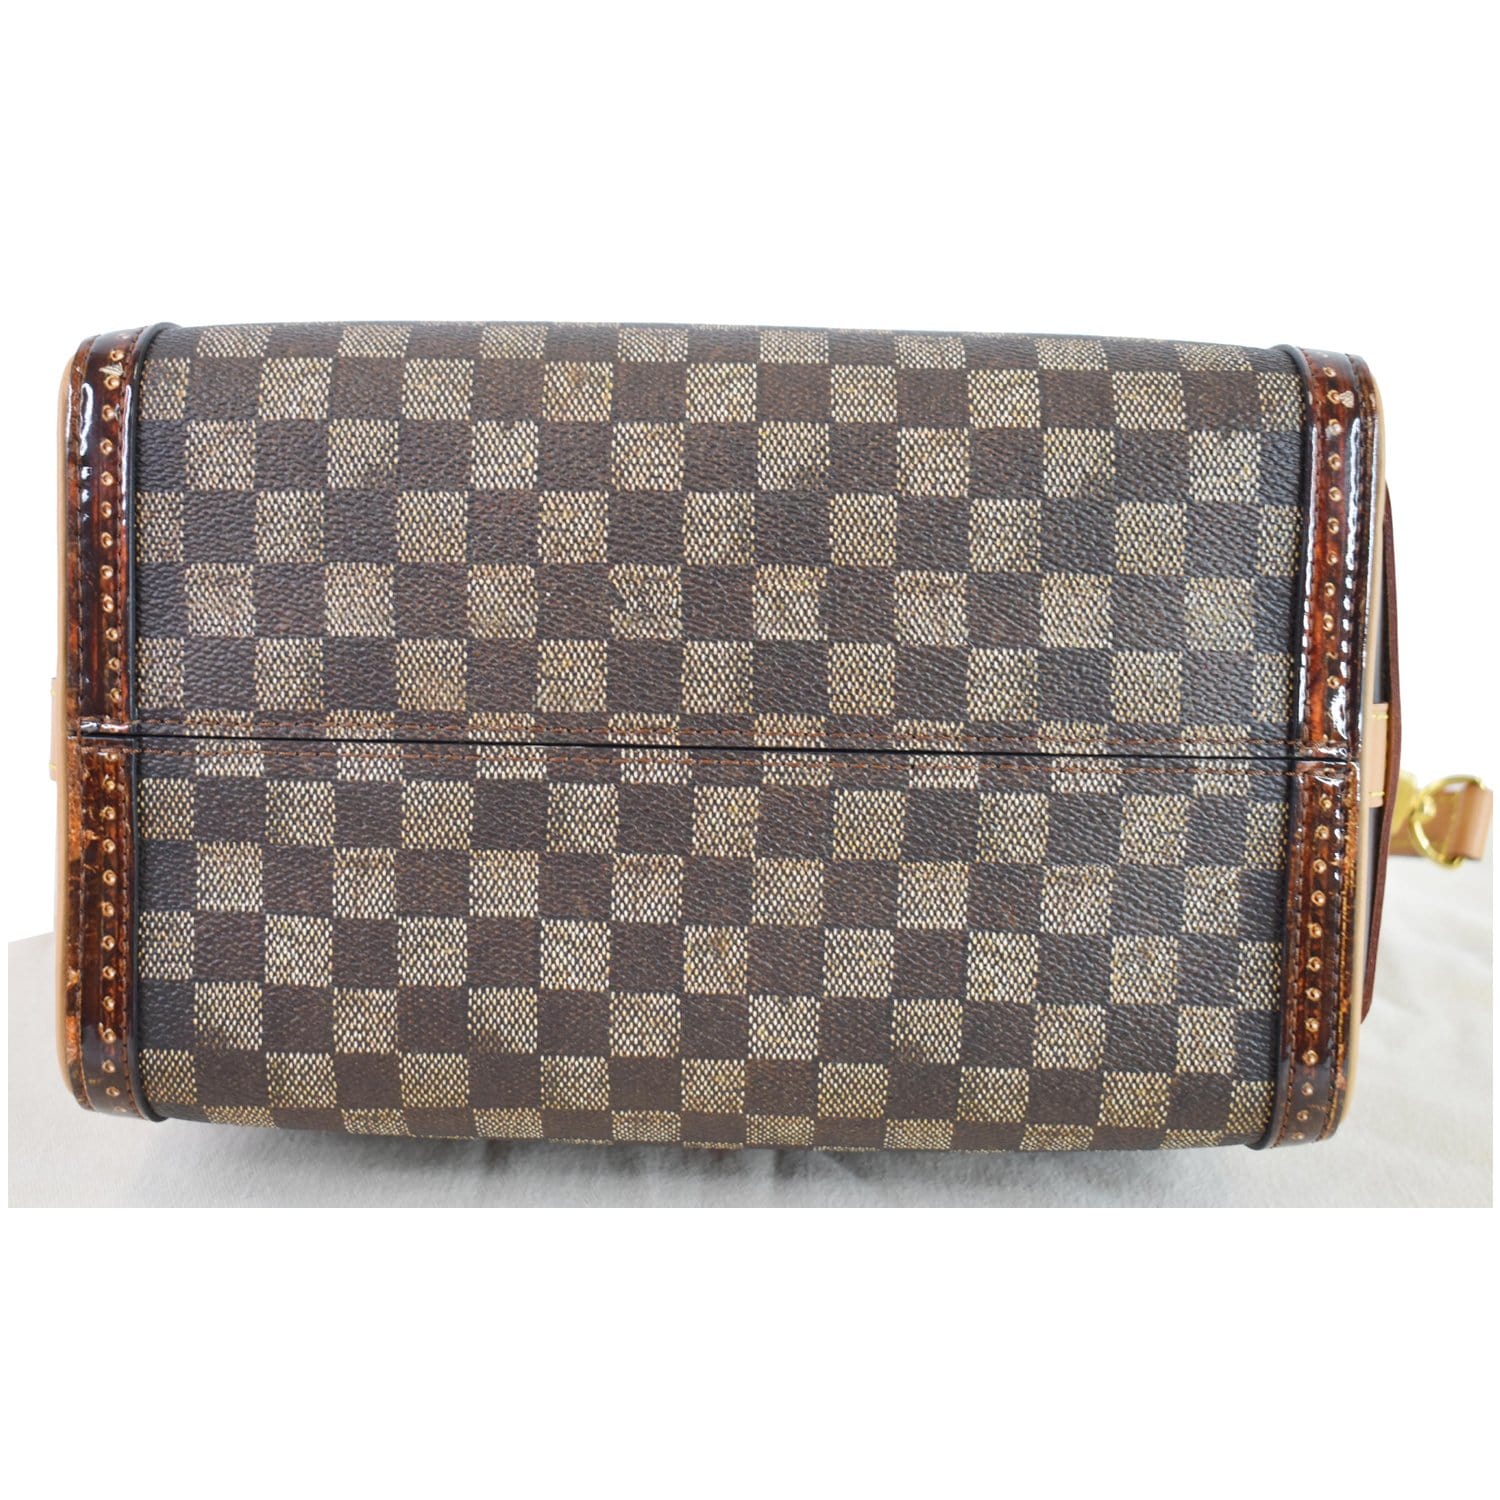 Louis Vuitton Time Trunk Bags – You and I